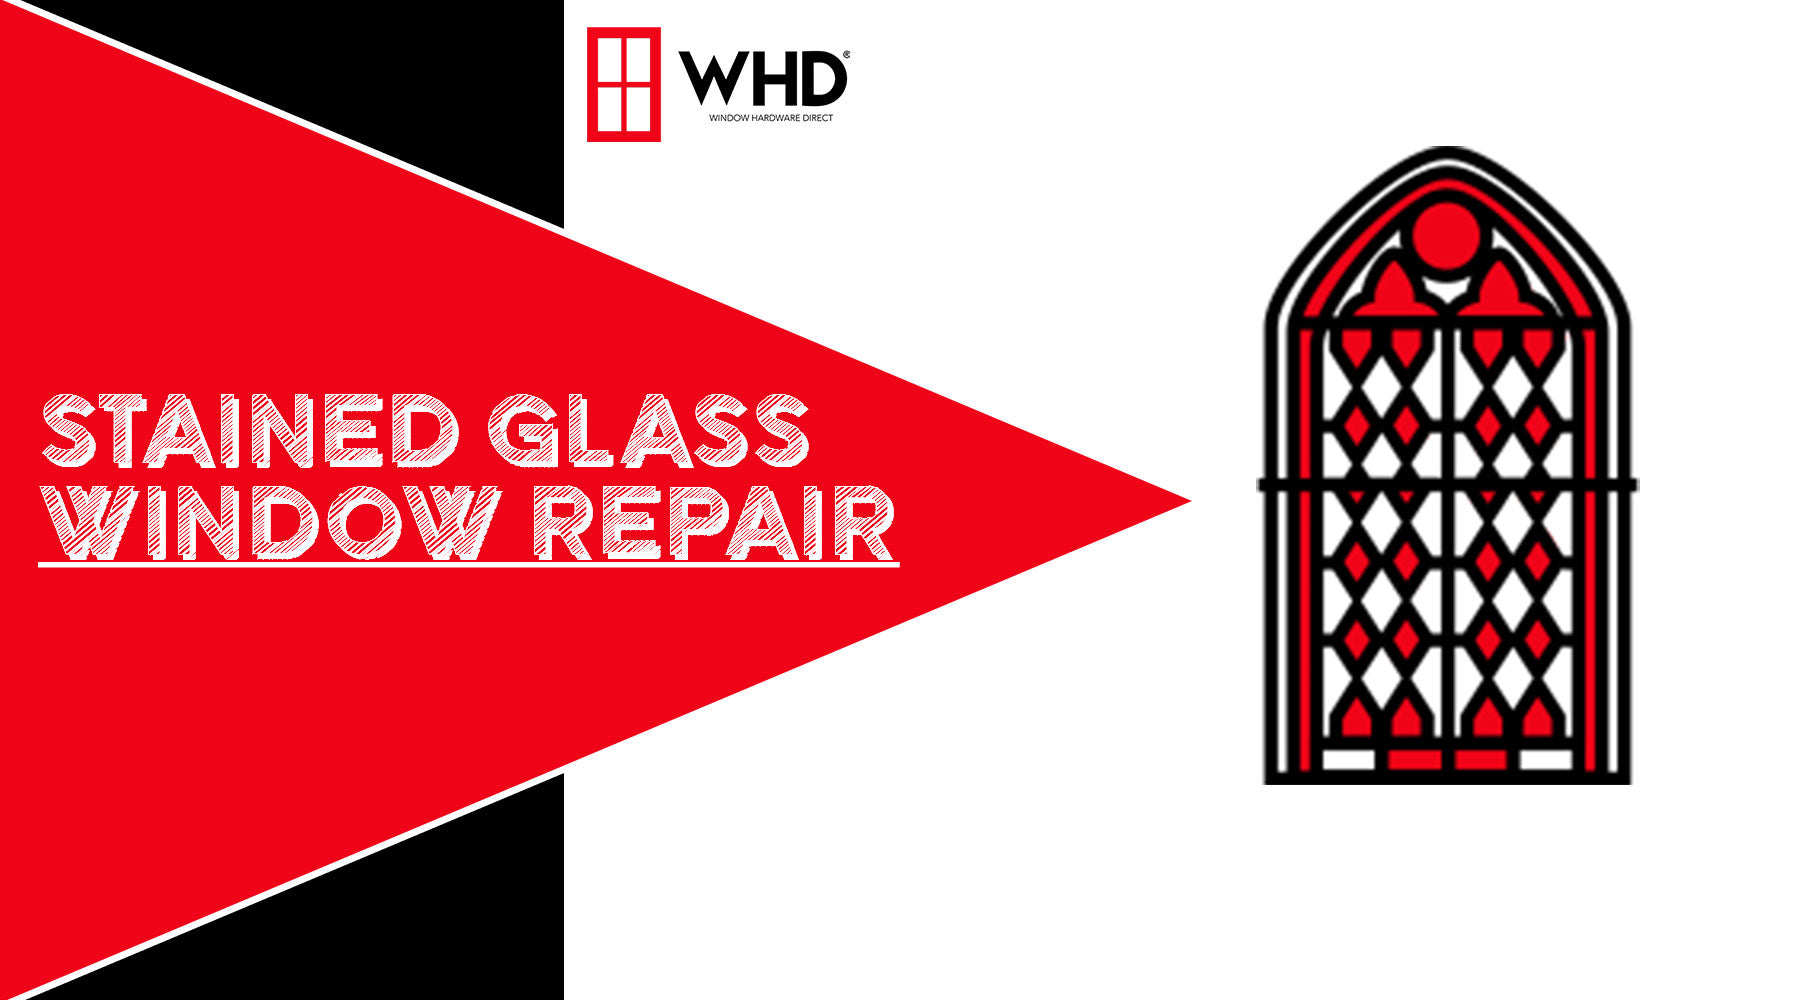 Restoring Beauty & History with Stained Glass Window Repair